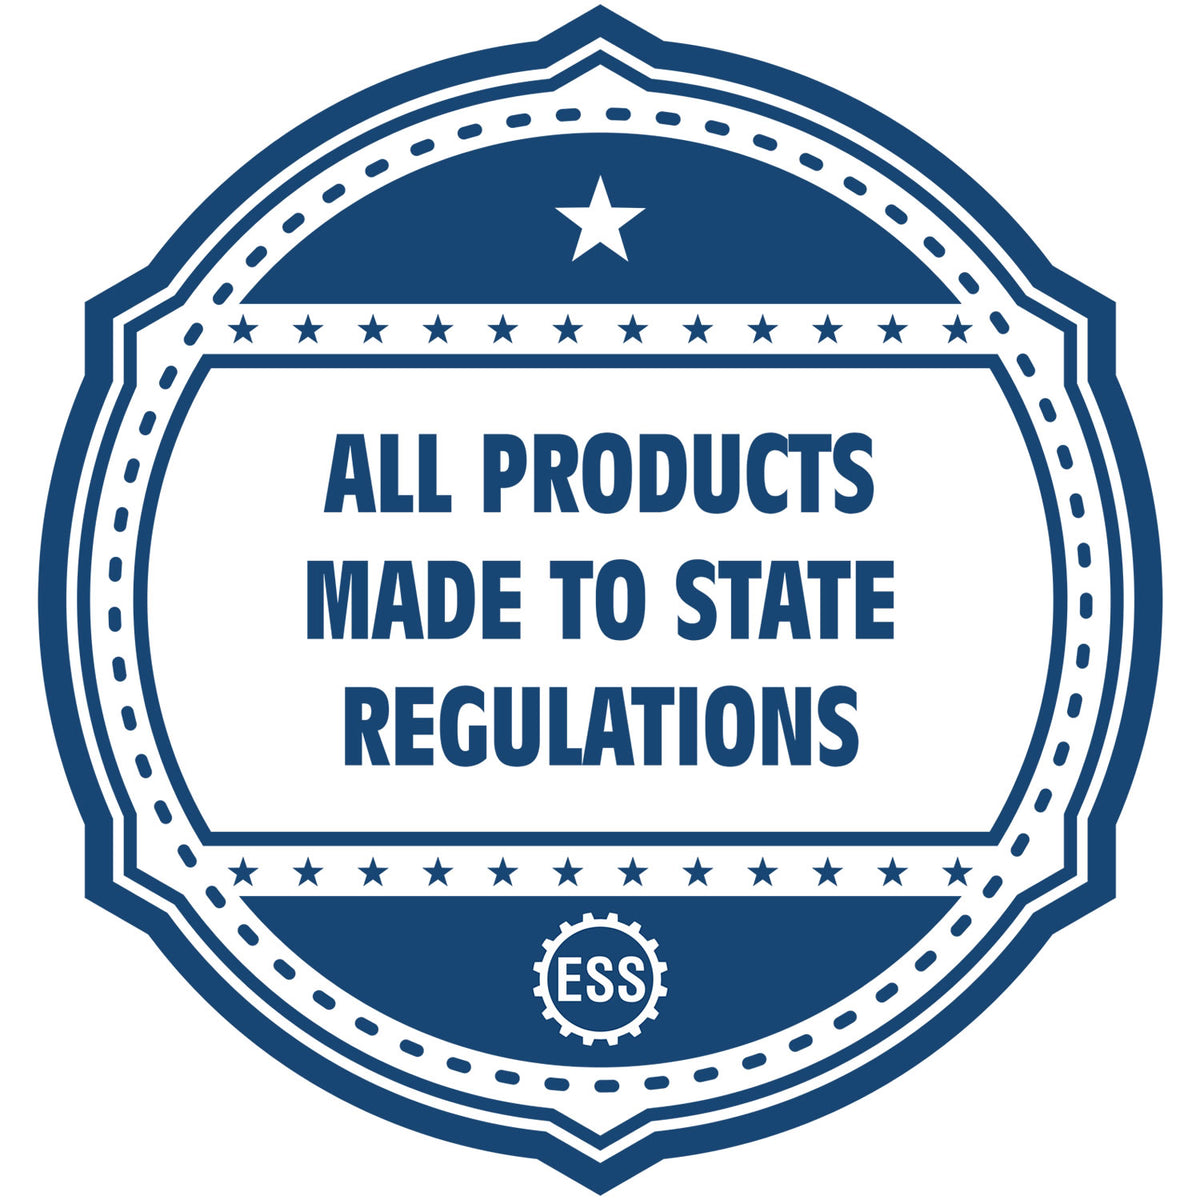 An icon or badge element for the Digital New York Landscape Architect Stamp showing that this product is made in compliance with state regulations.